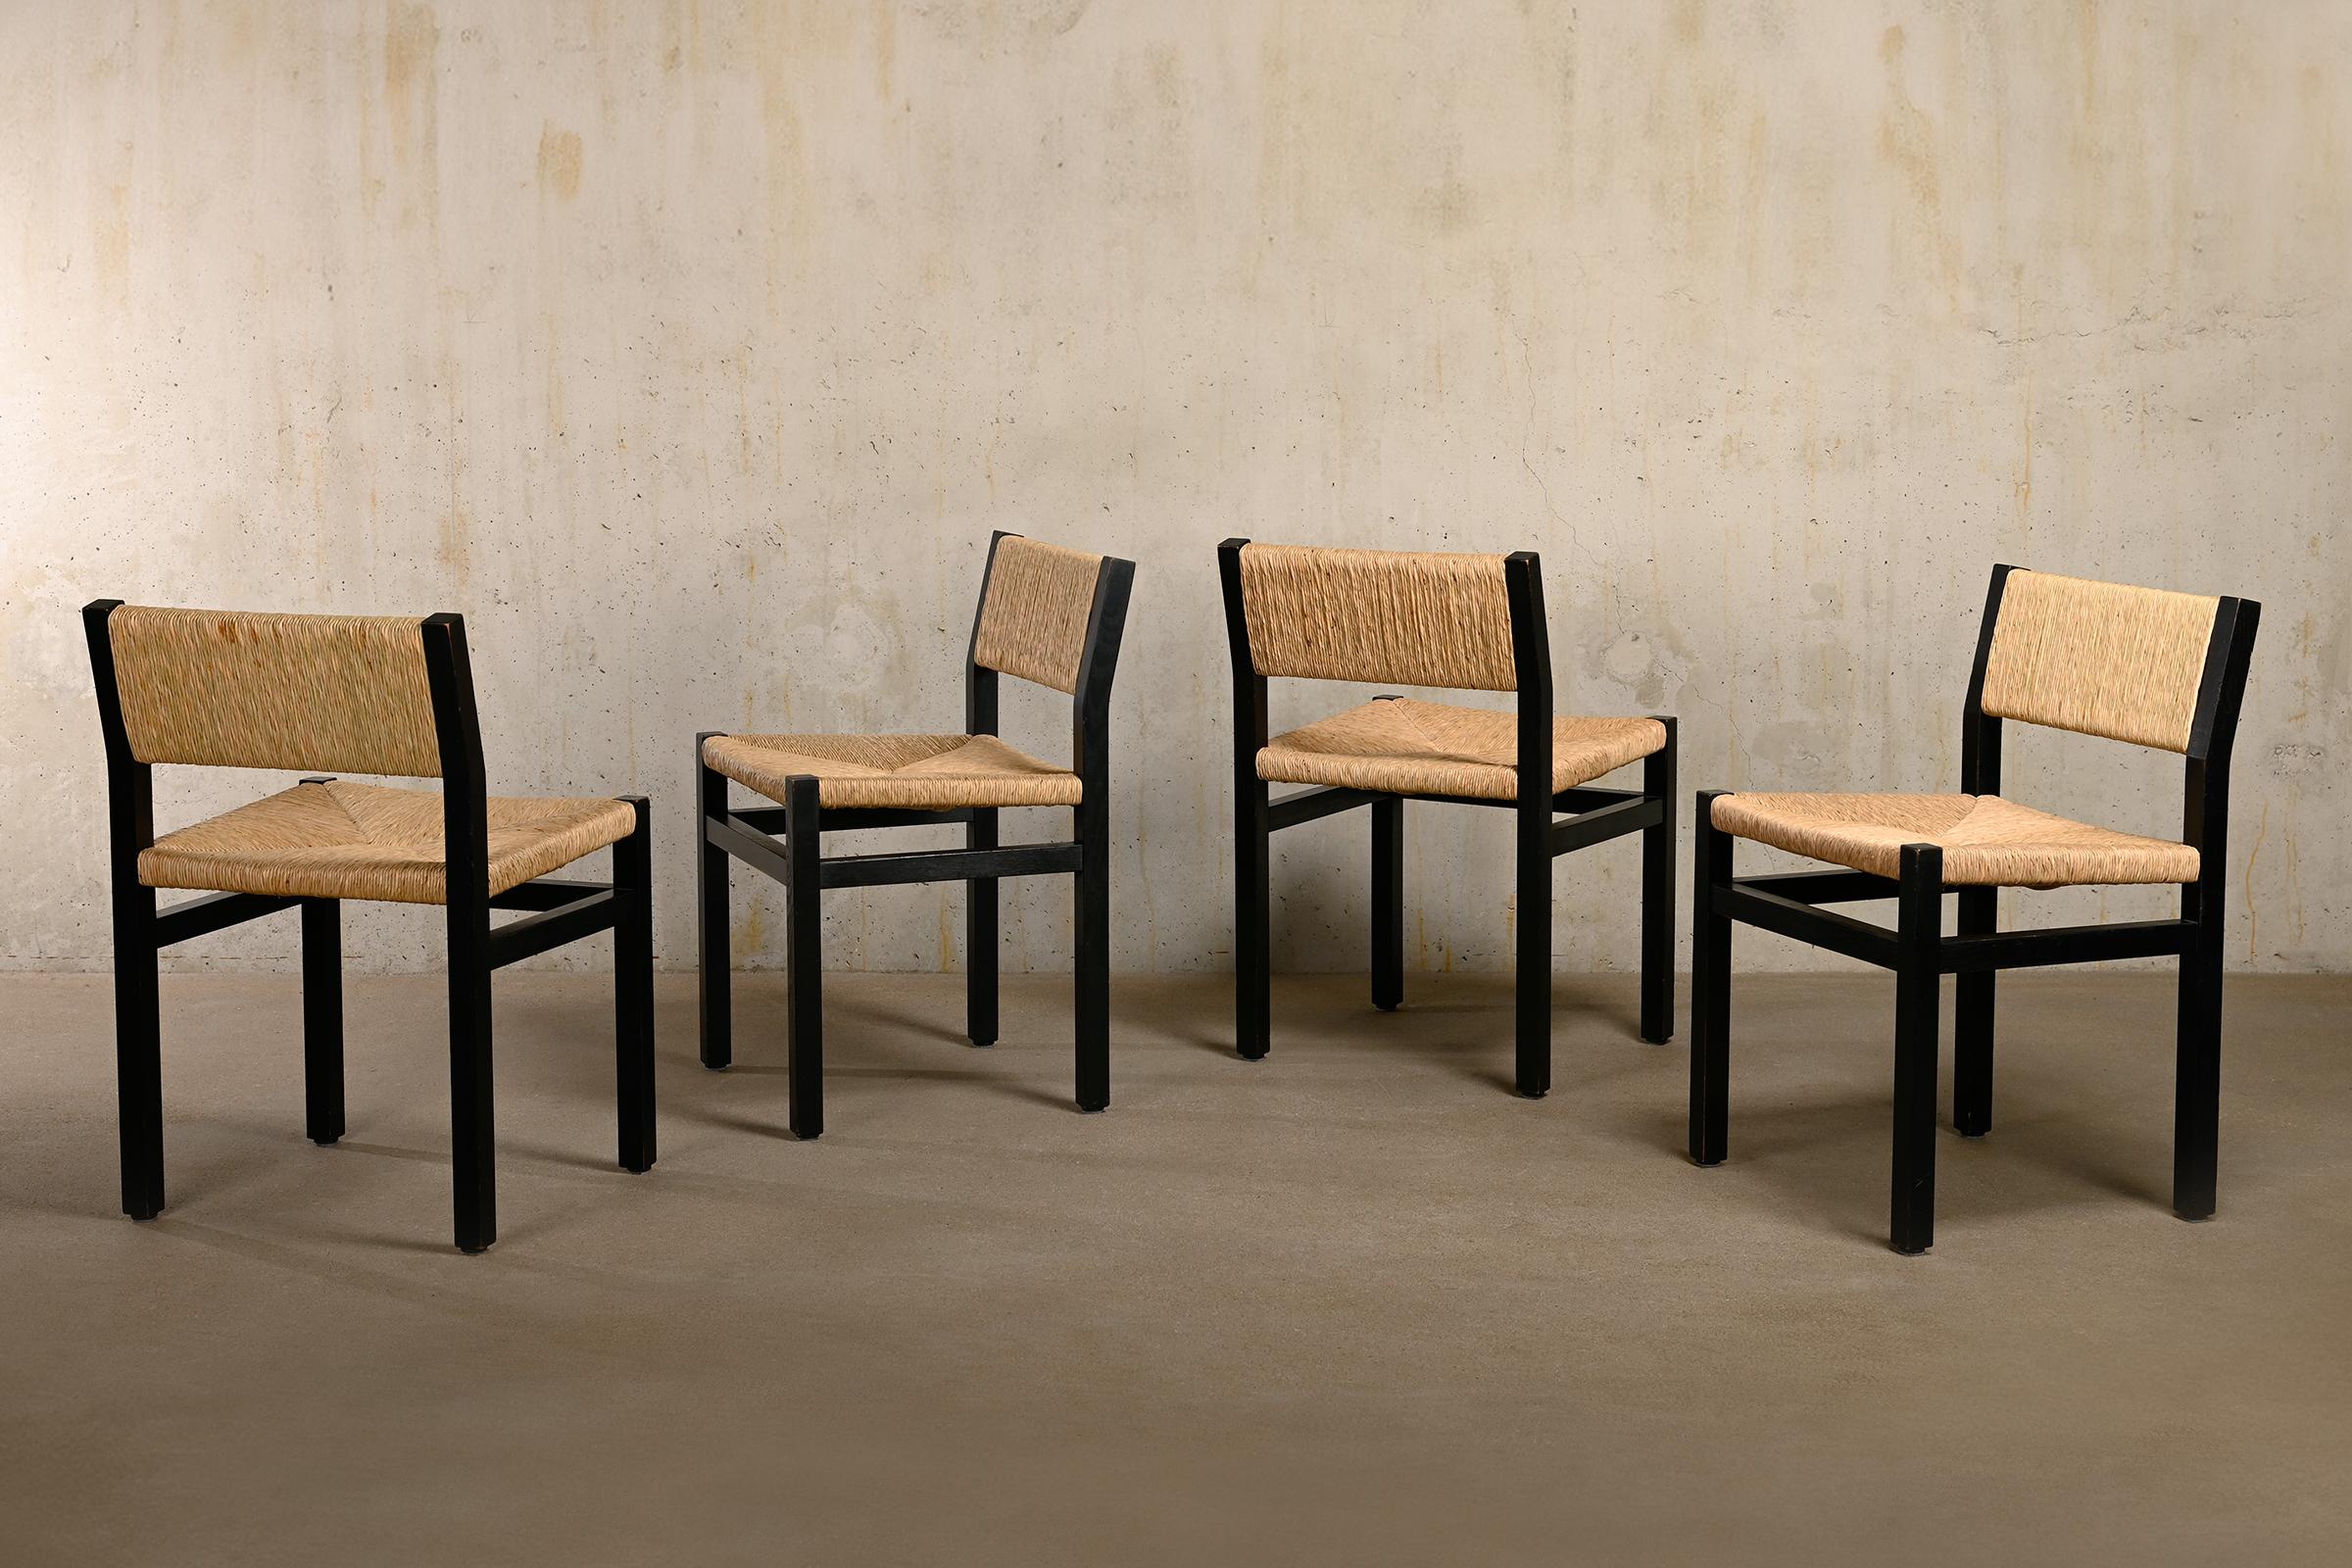 Beautiful set of 4 dining chairs (Model SE82) designed by Martin Visser for 't Spectrum, Netherlands 1970s. Black painted ash wooden frames with hand-woven rush seats and back rests. The design is characterized by simple, sleek lines, but the use of